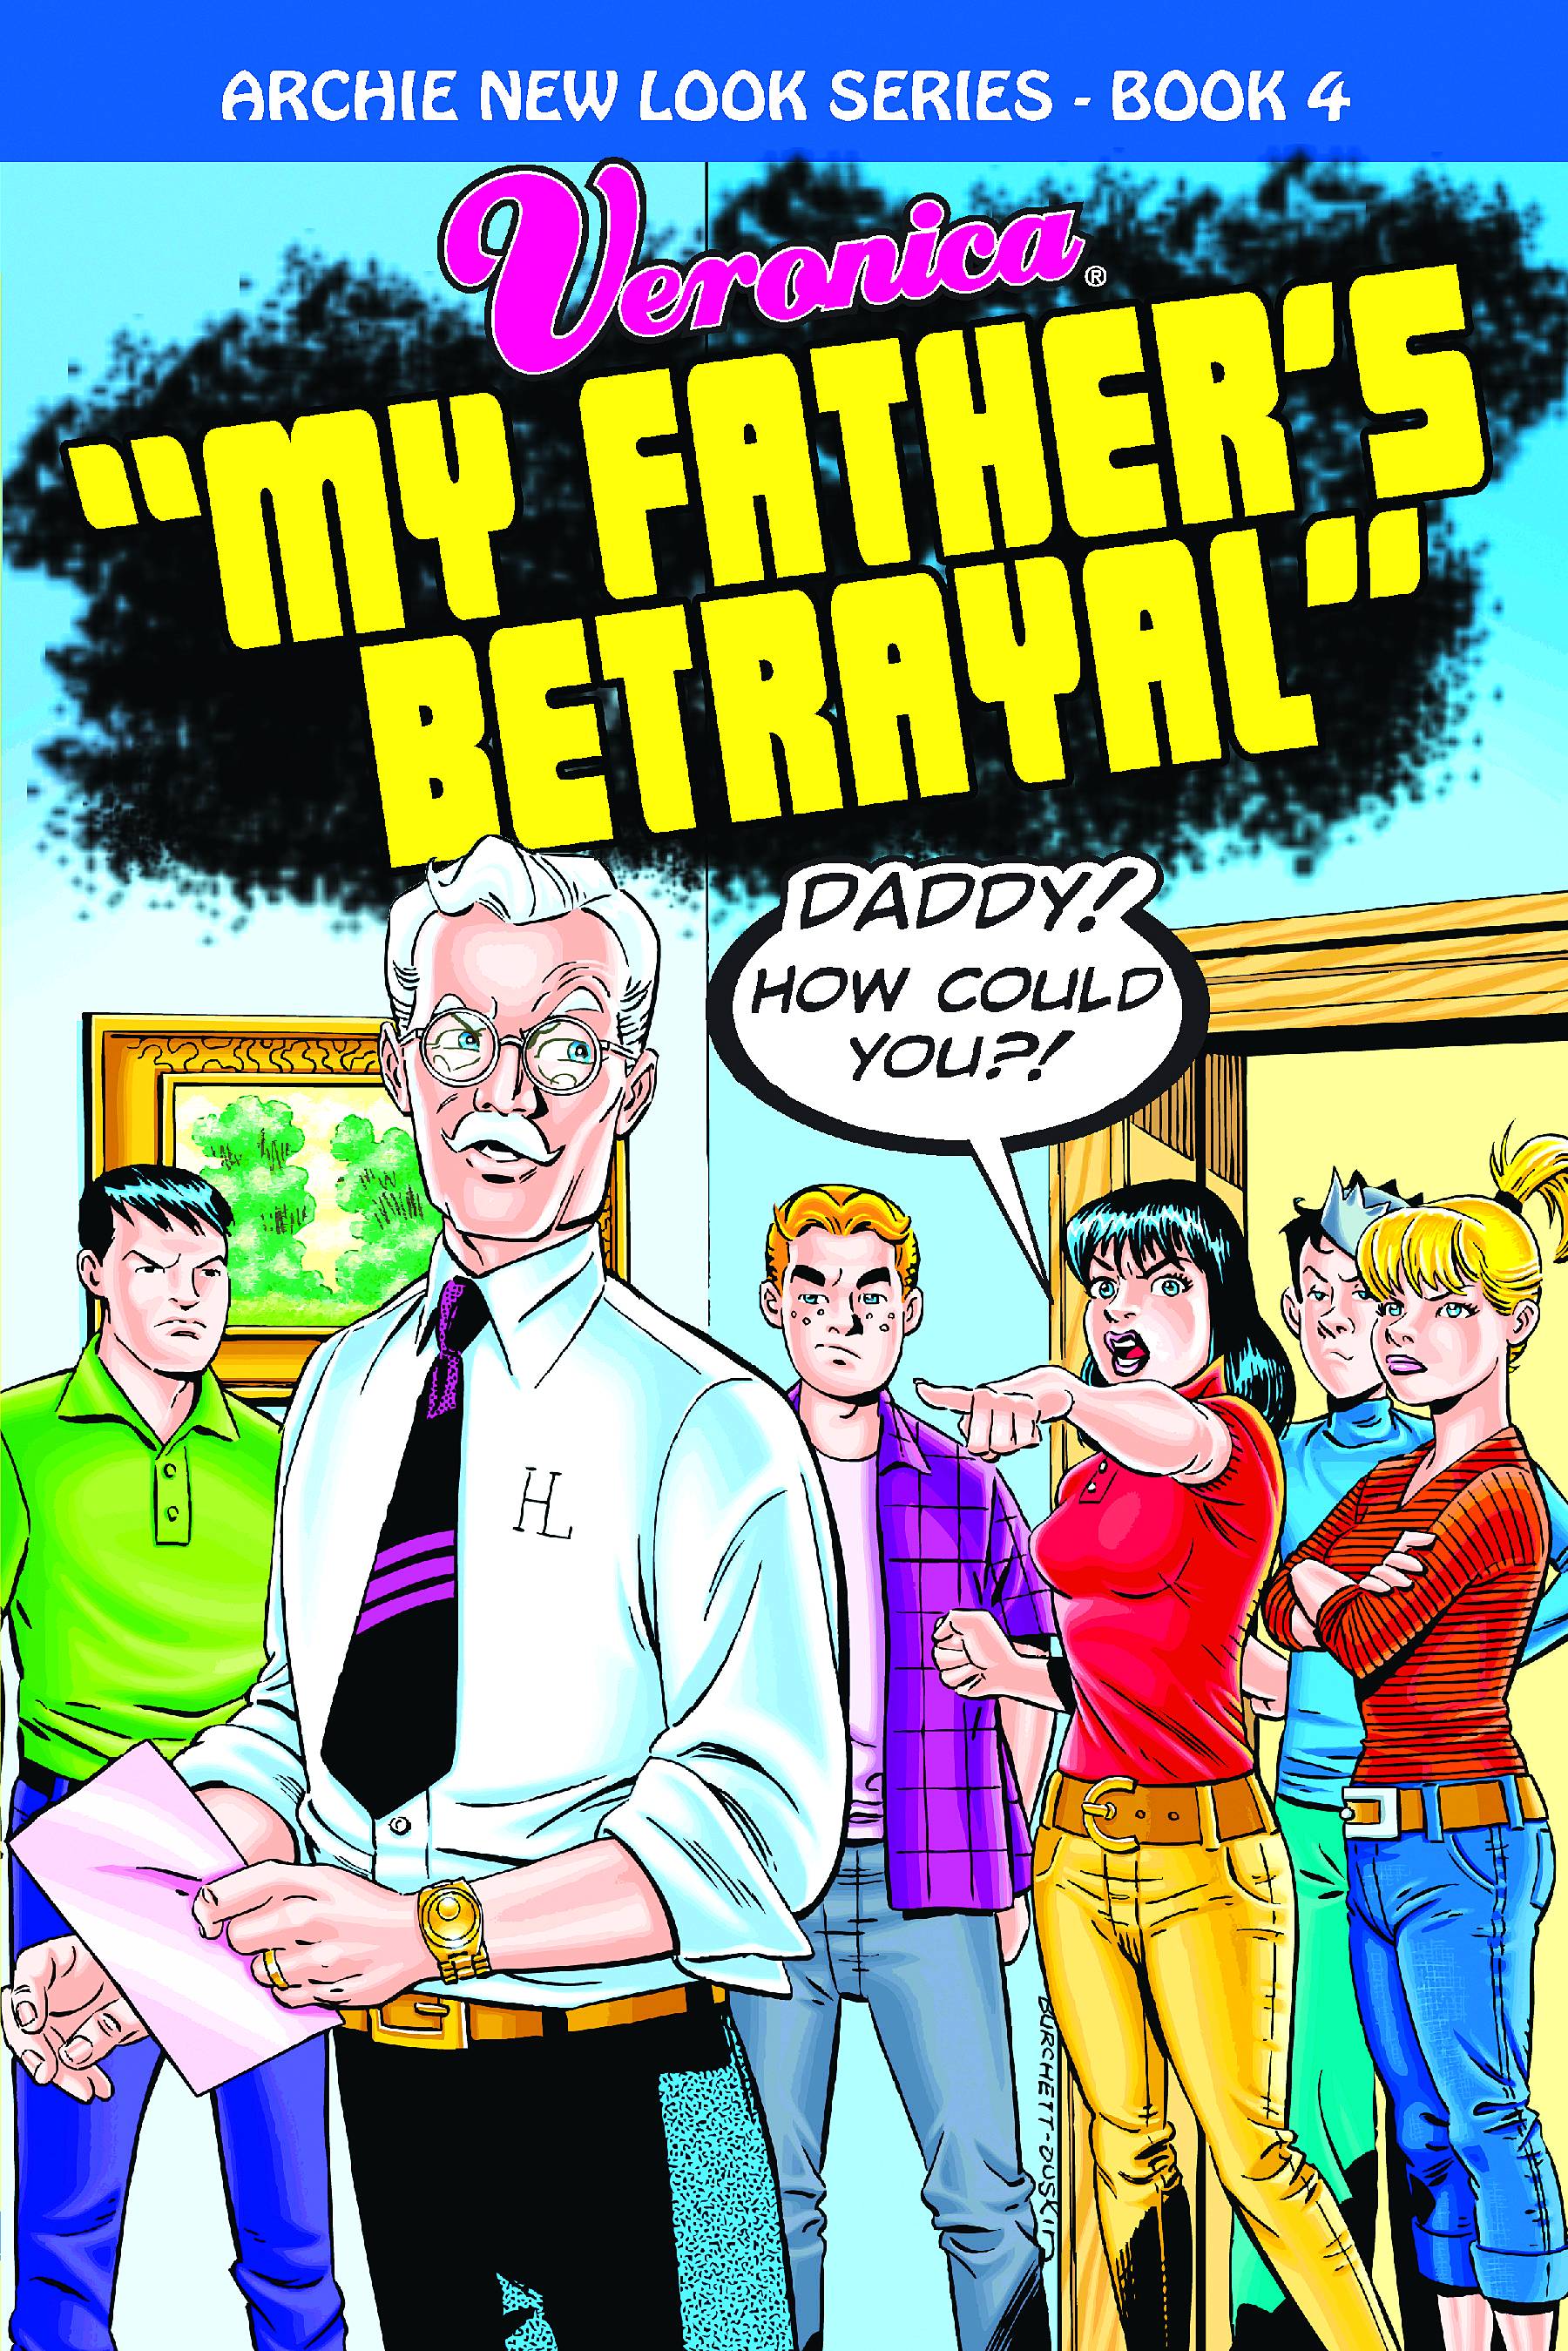 Archie New Look Series Graphic Novel Volume 4 My Fathers Betrayal